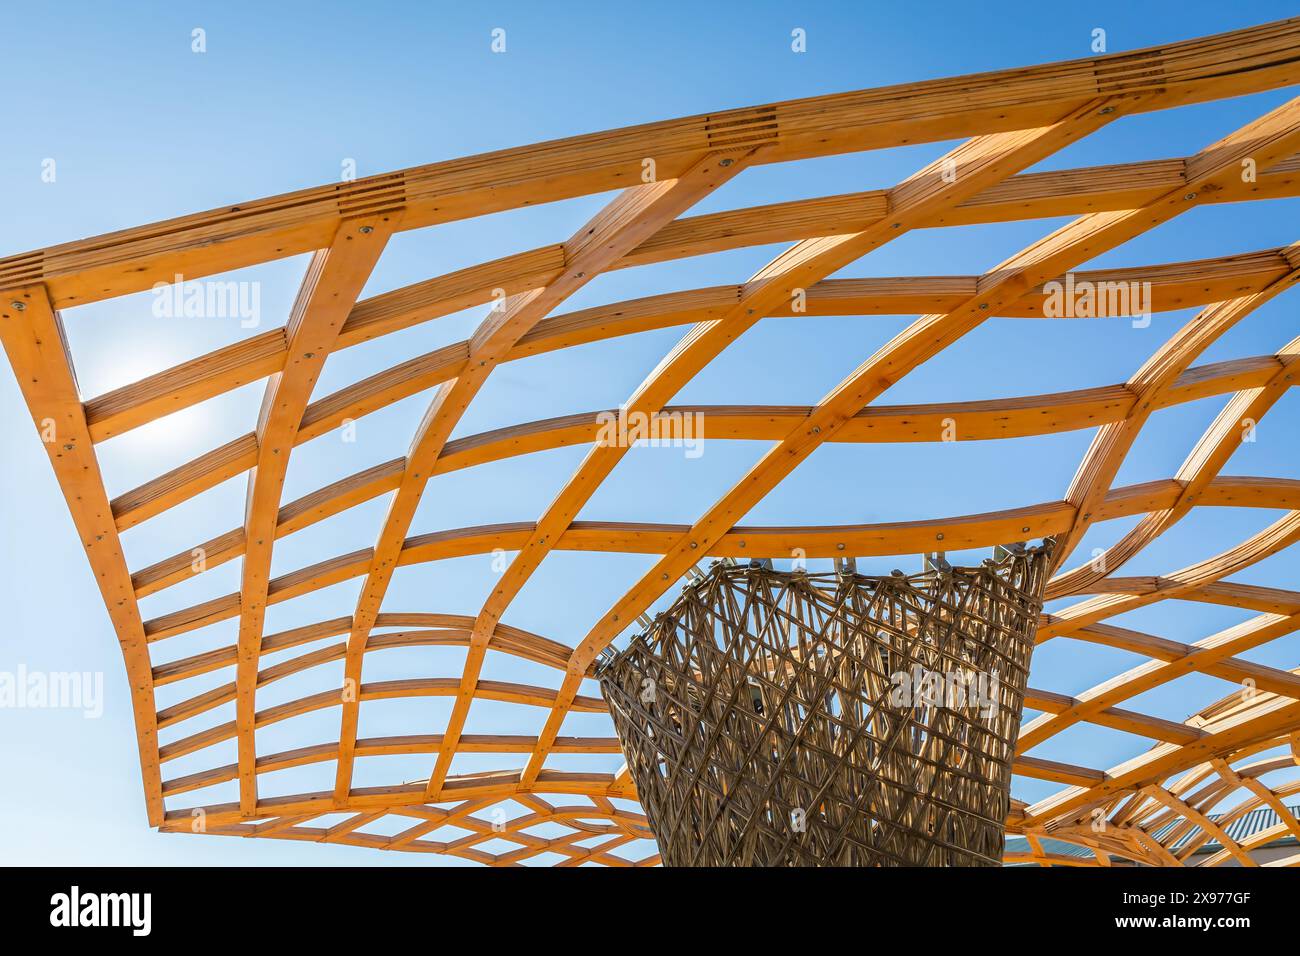 Detail of a modern wooden architecture, wooden roof, openwork design Stock Photo